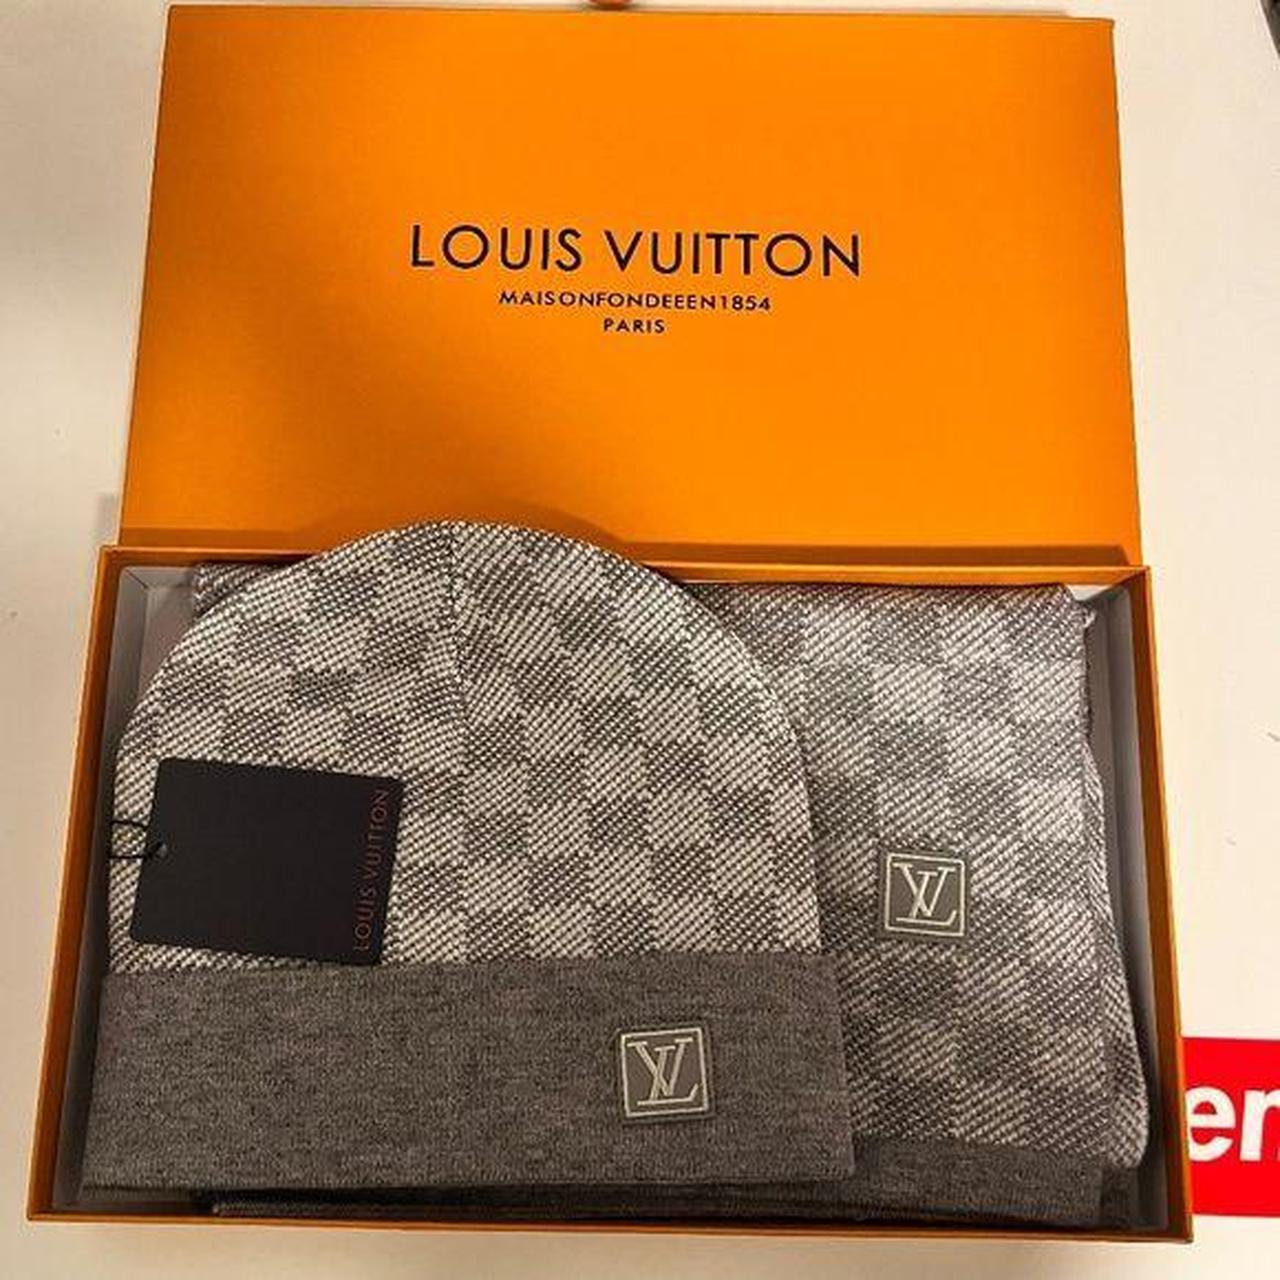 Louis Vuitton hat and scarf // message before buying